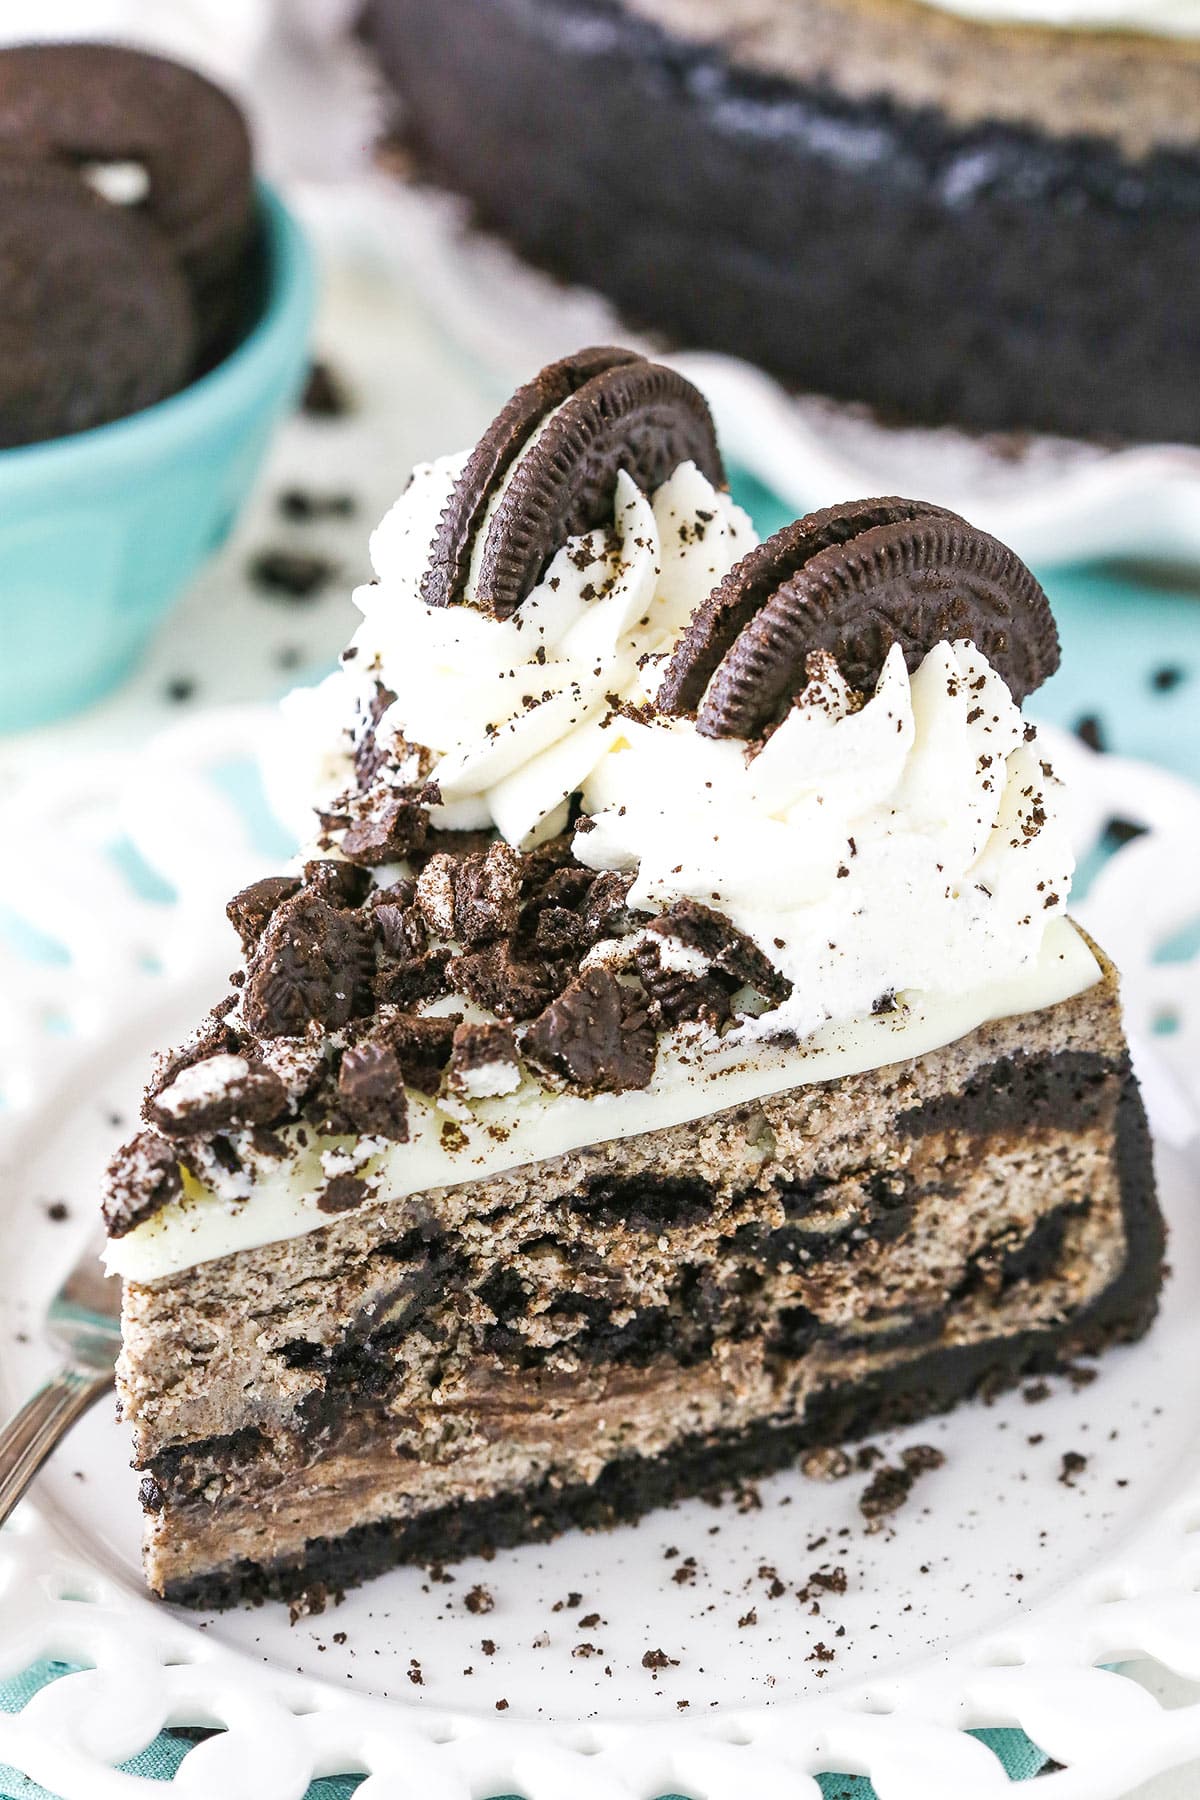 A slice of the BEST Oreo cheesecake served on a plate.